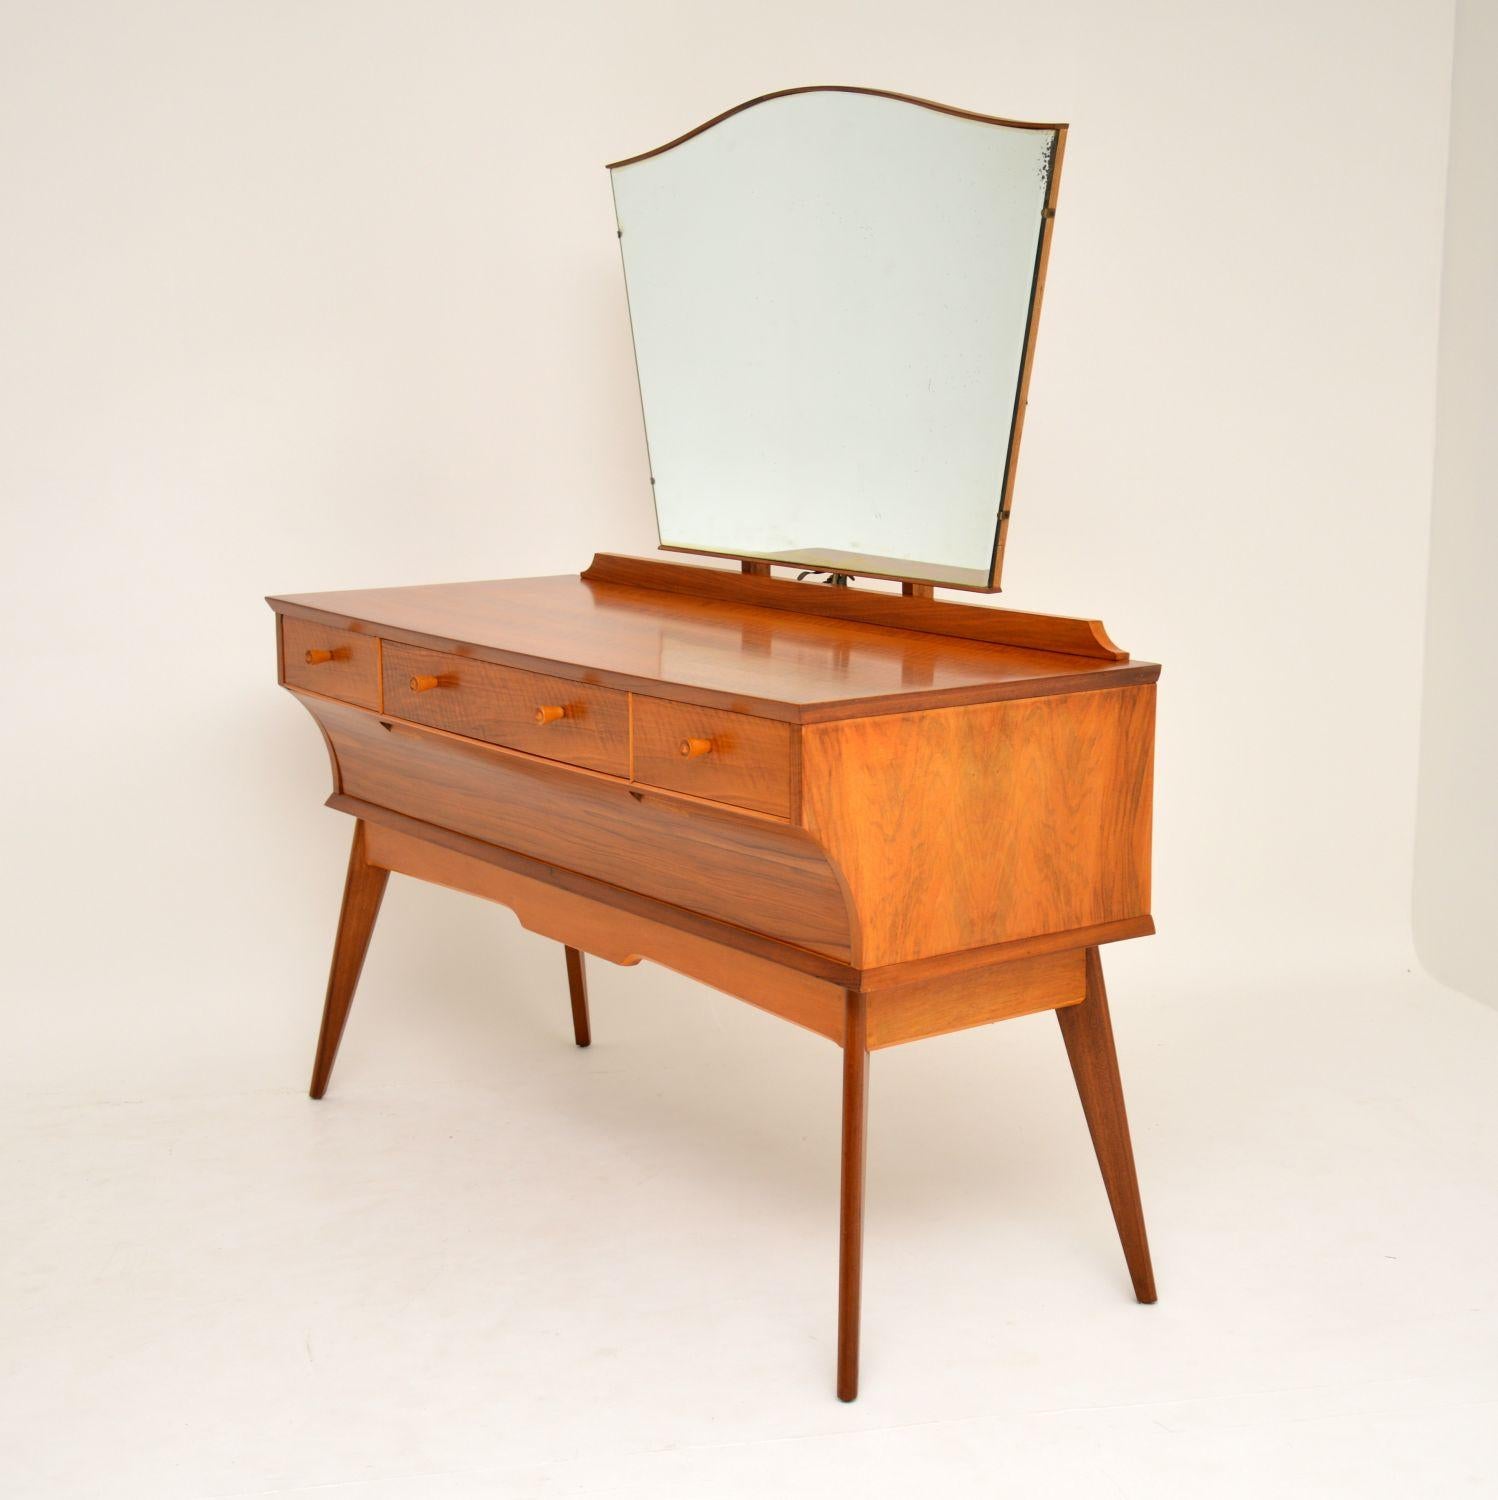 A beautifully styled vintage dressing table in walnut, made by the high end manufacturer Alfred Cox. This dates from the 1950-60’s and is in superb condition. We have had this fully stripped and re-polished to a very high standard. It sits on